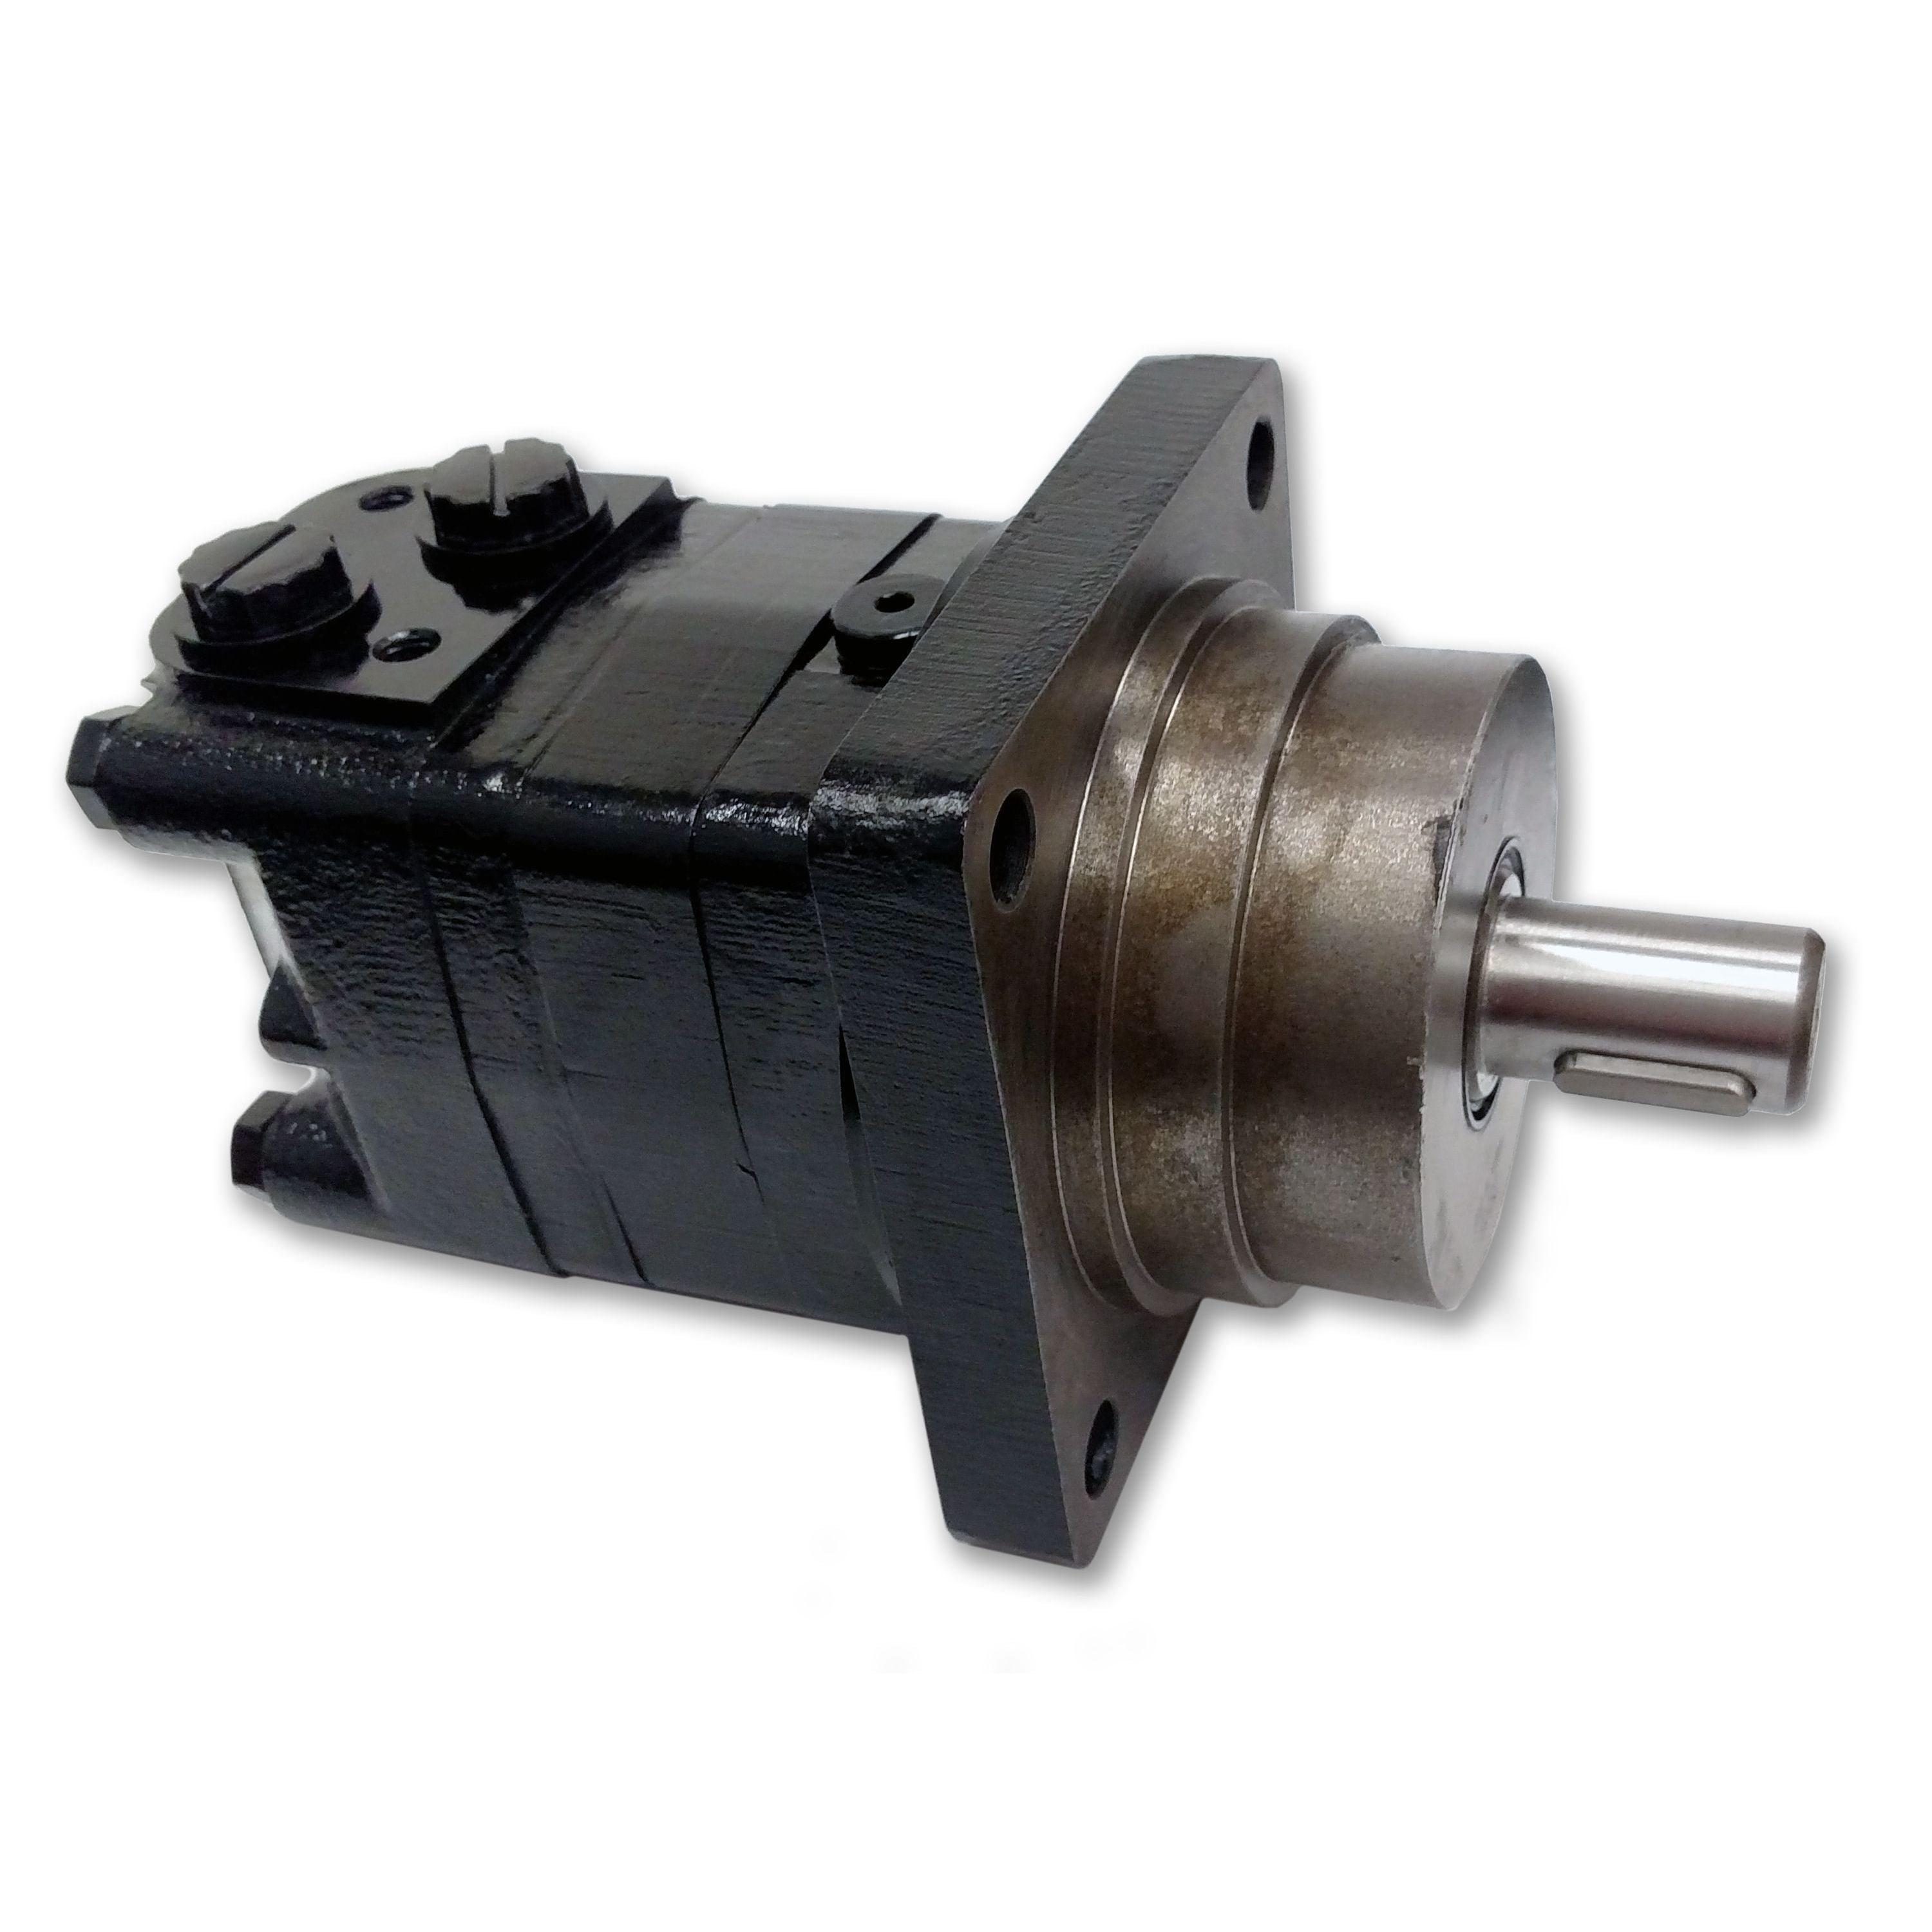 BMSY-315-WE-T4-S : Dynamic LSHT Motor, 311cc, 240RPM, 7787in-lb, 2900psi Differential, 19.81GPM, Wheel Mount, 1.25" Bore x 5/16" Key Shaft, Side Ported, #10 SAE (5/8")